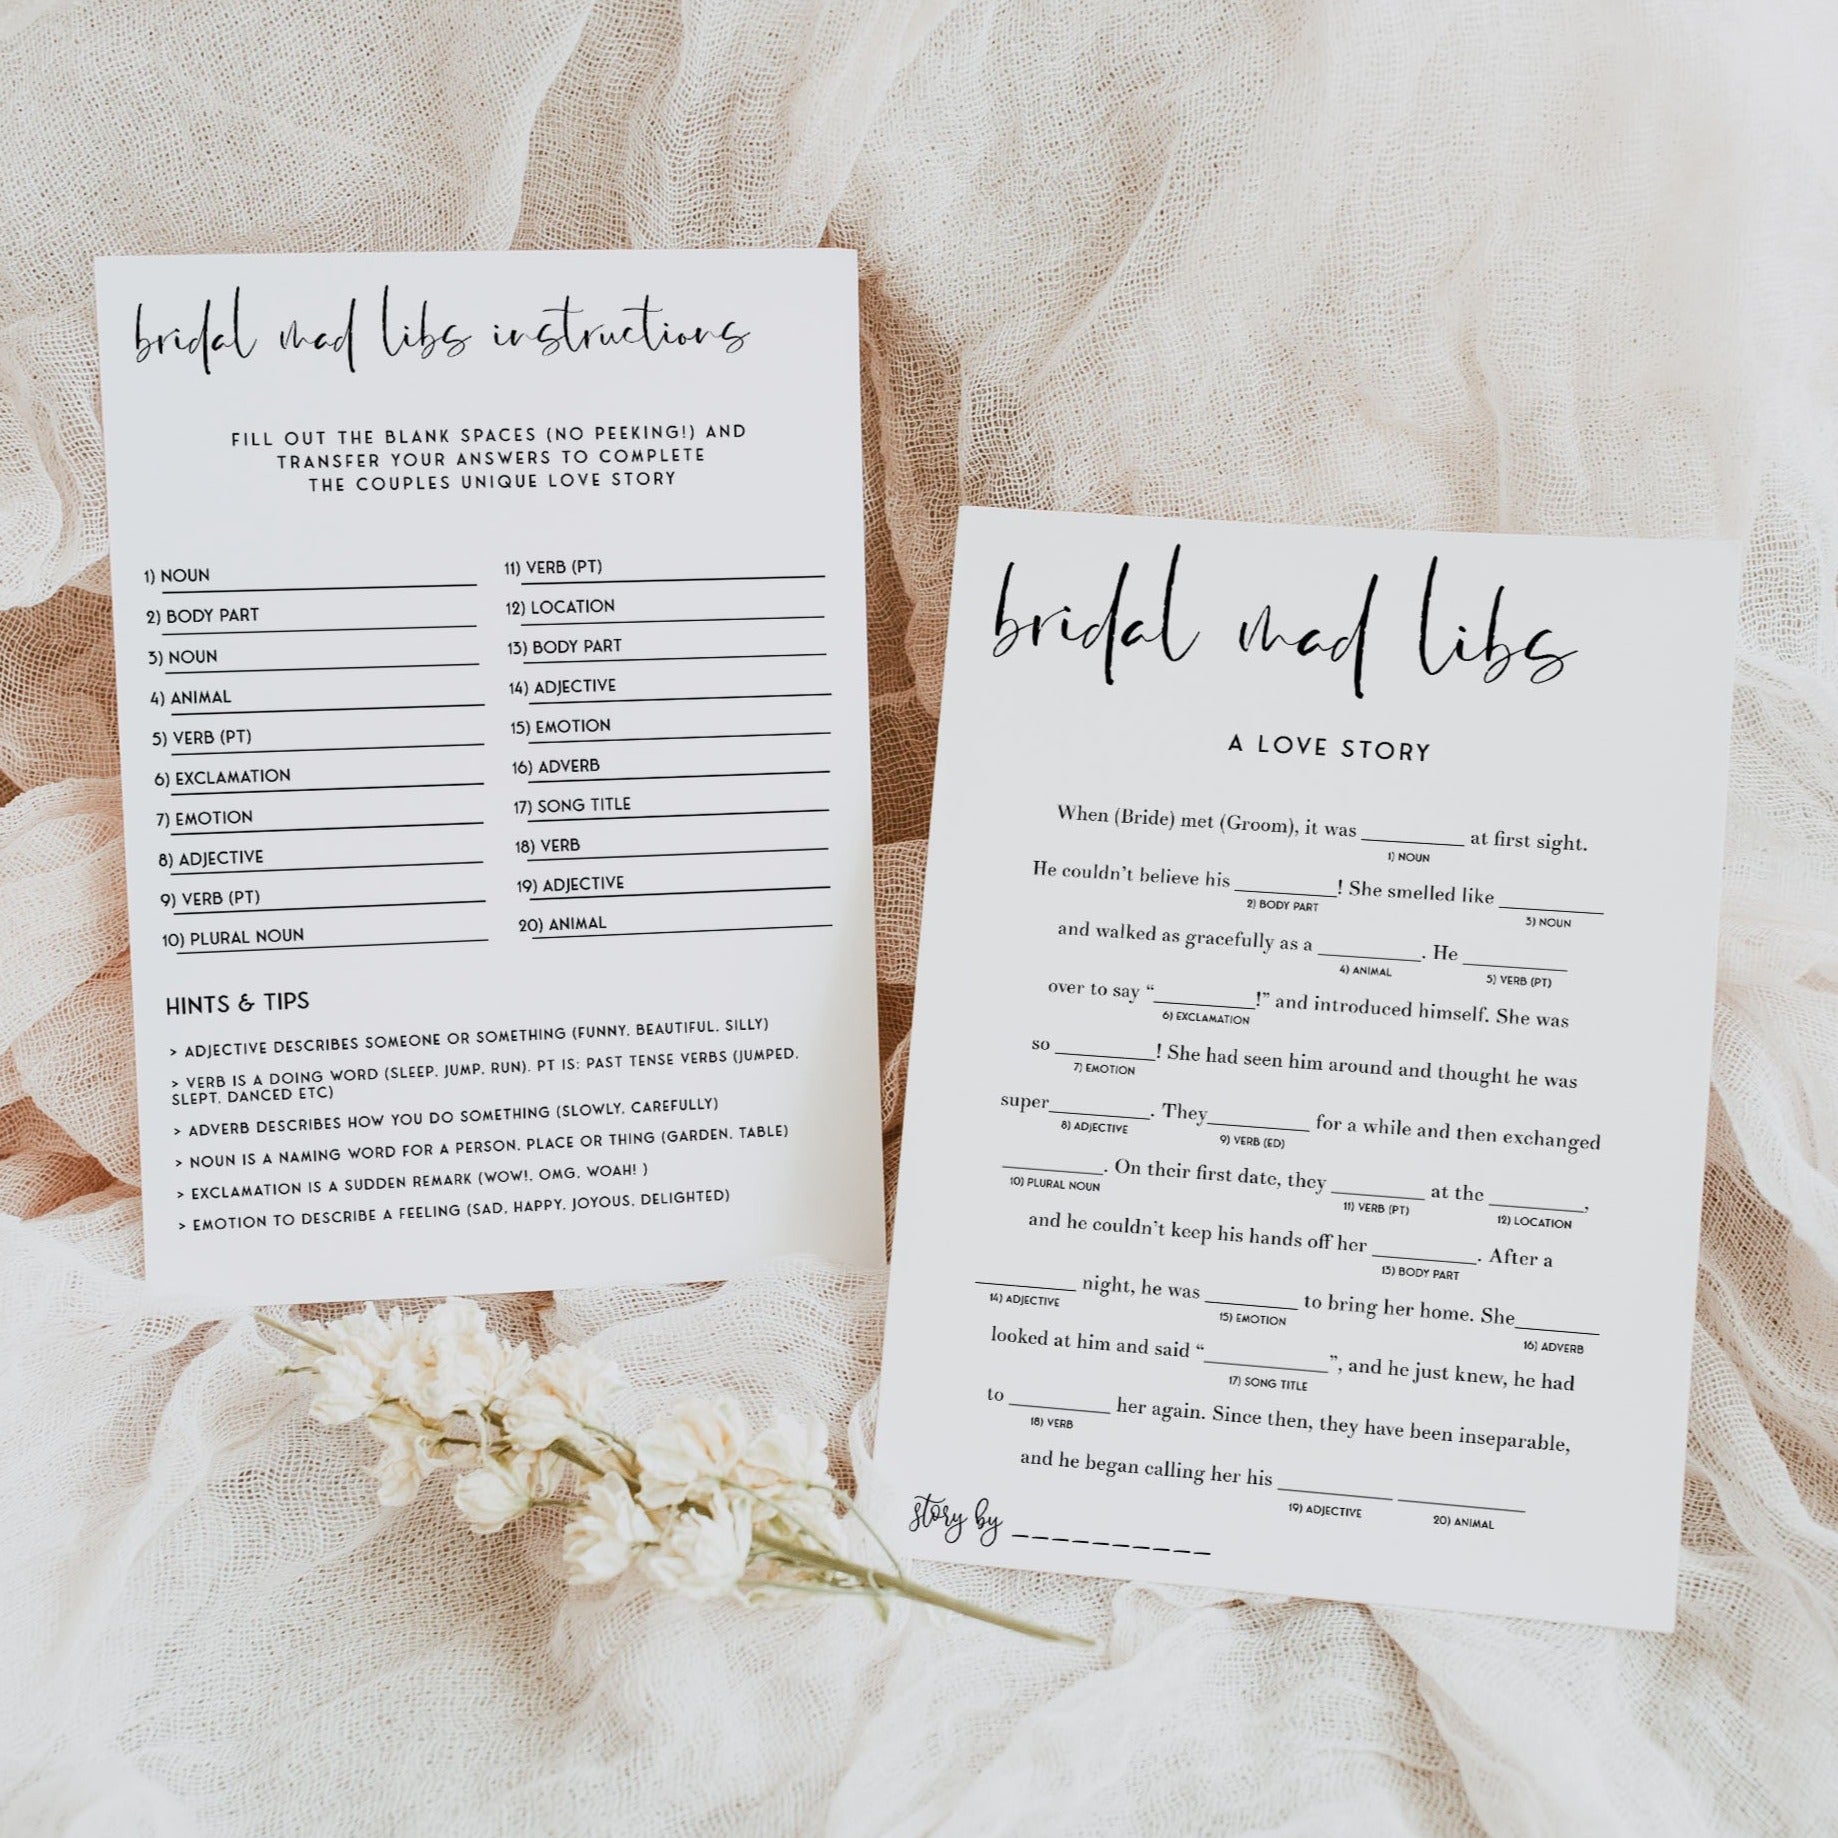 Fully editable and printable bridal shower mad libs game with a modern minimalist design. Perfect for a modern simple bridal shower themed party